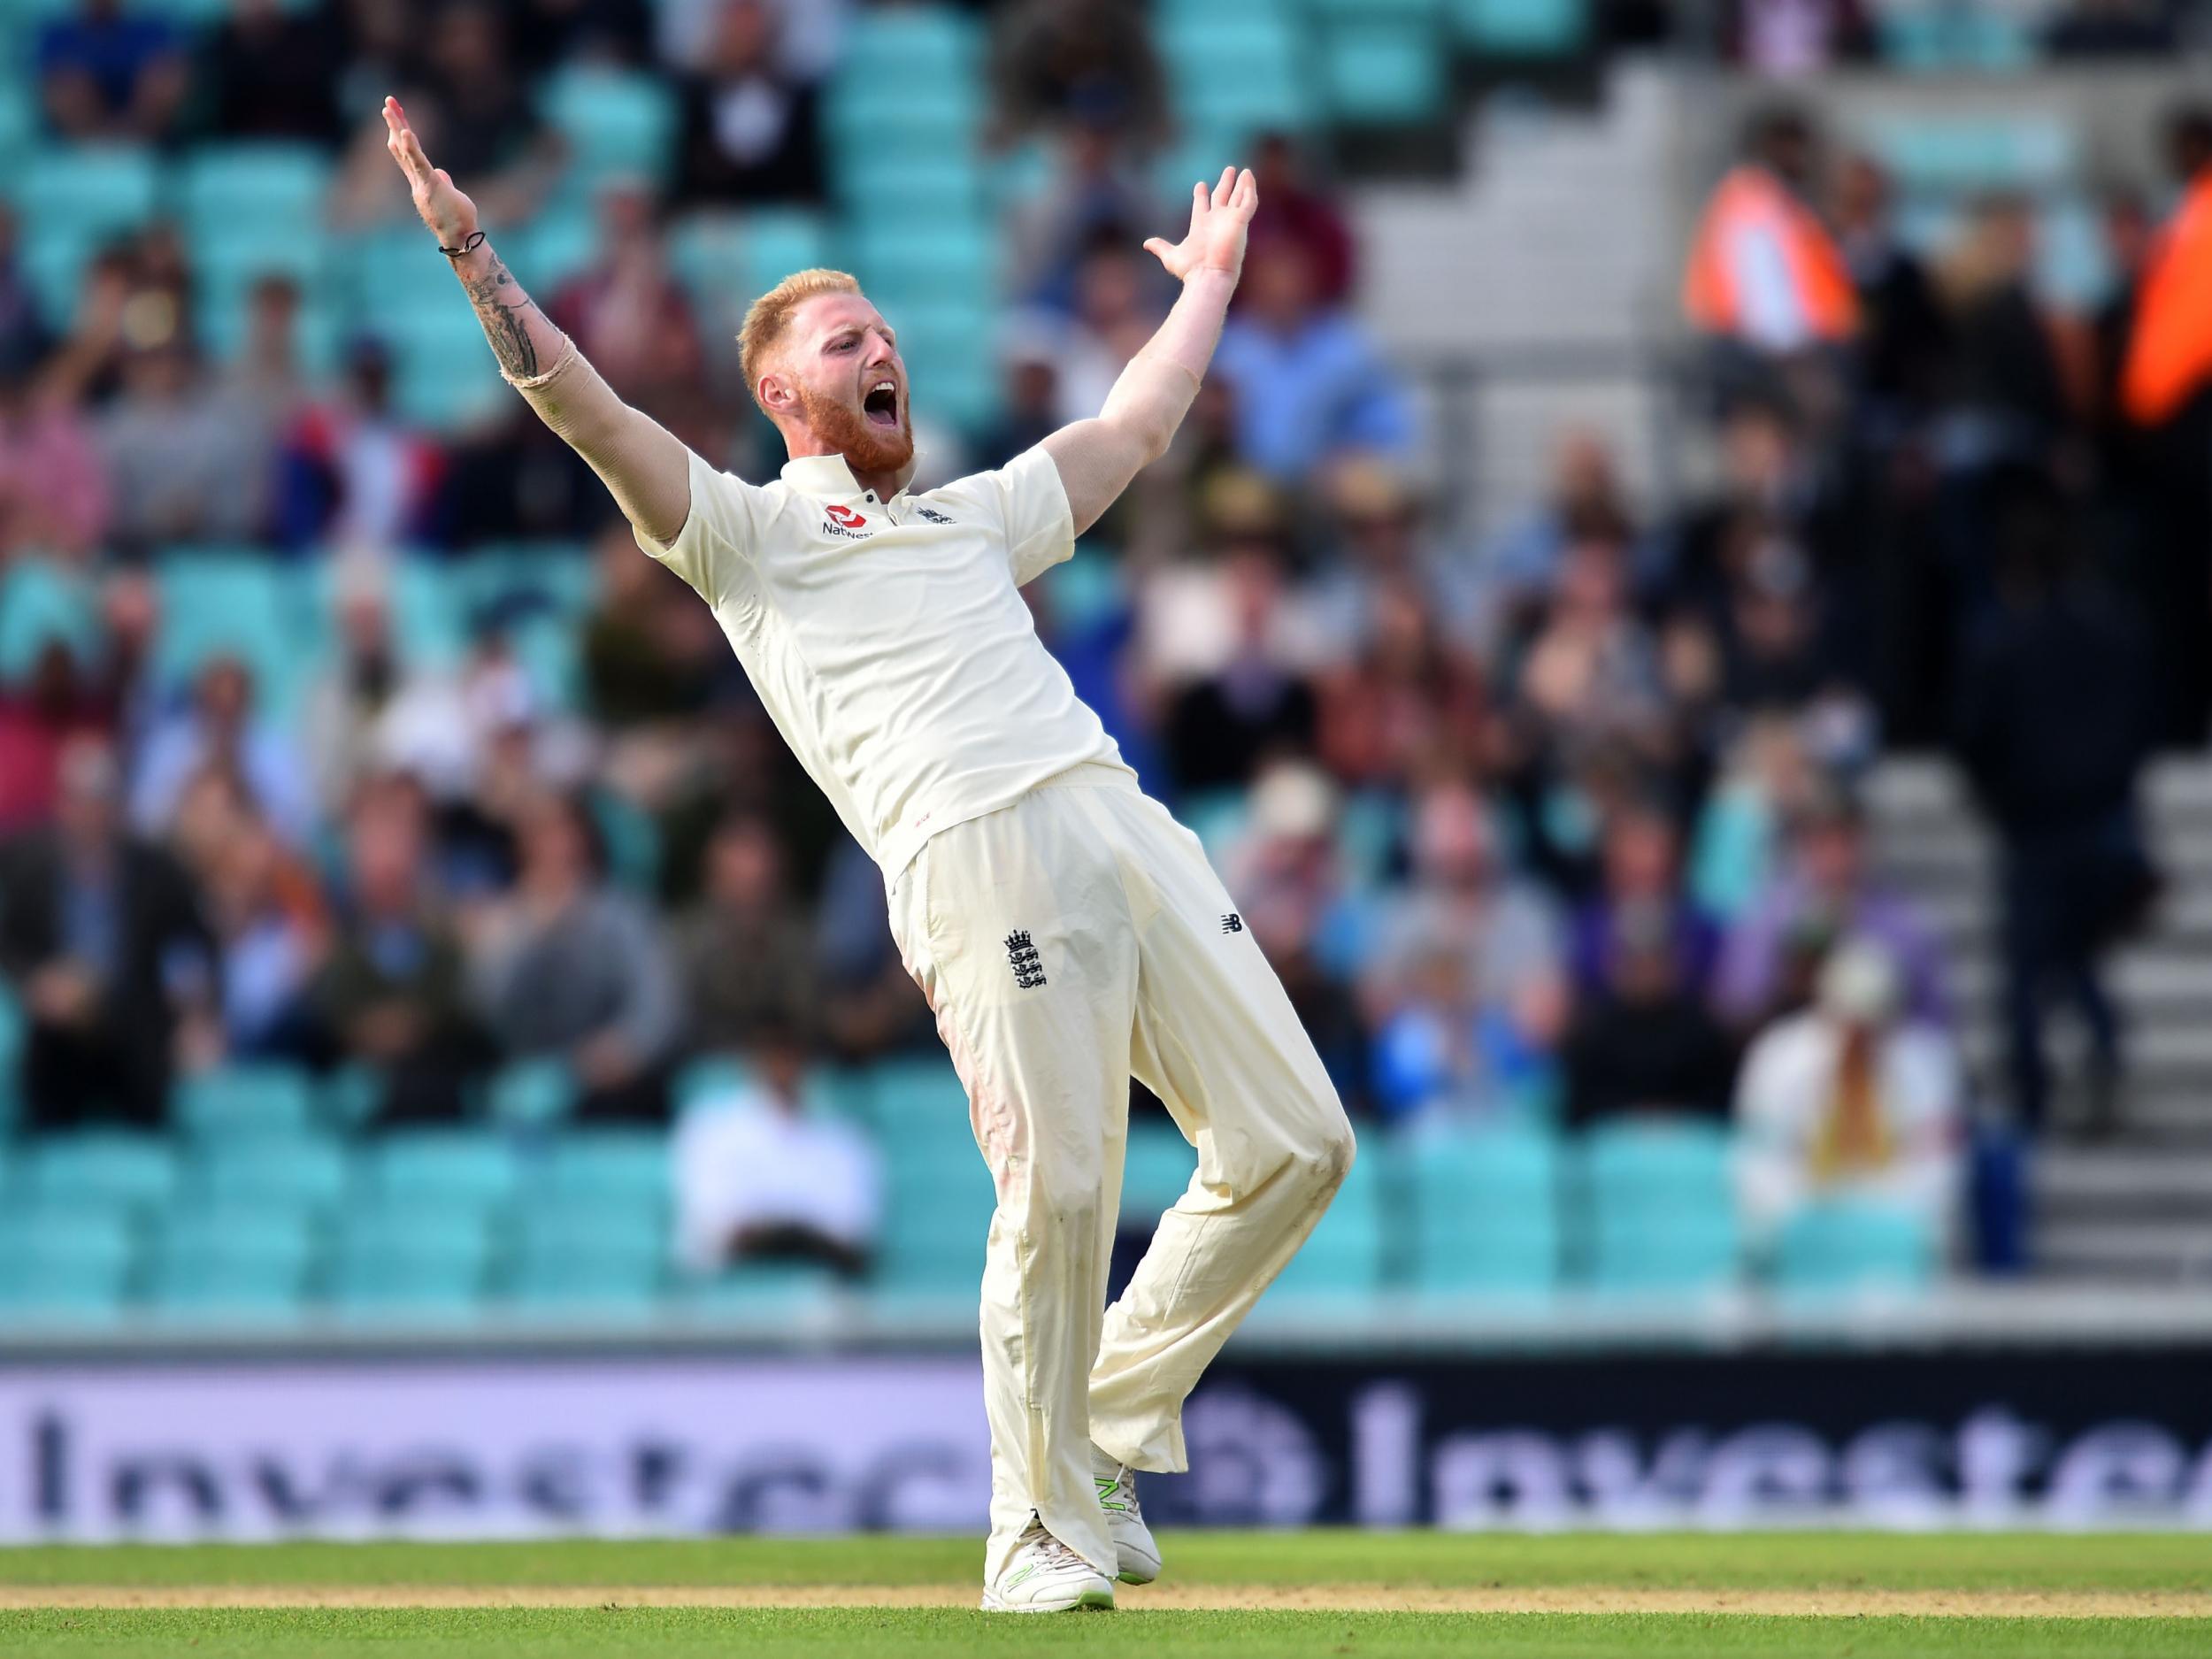 Ben Stokes' two wickets in two balls put England in total control